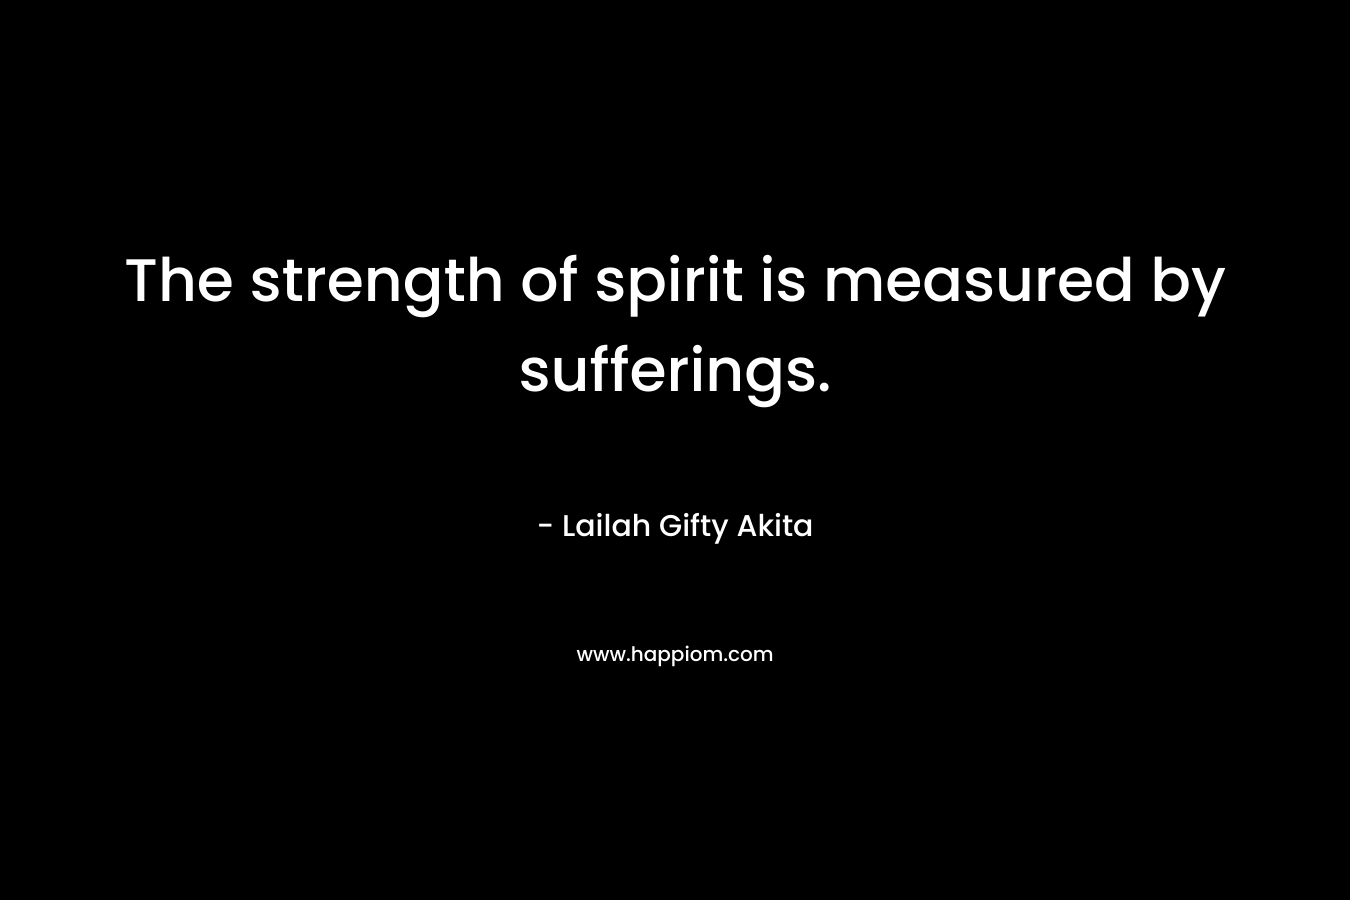 The strength of spirit is measured by sufferings.